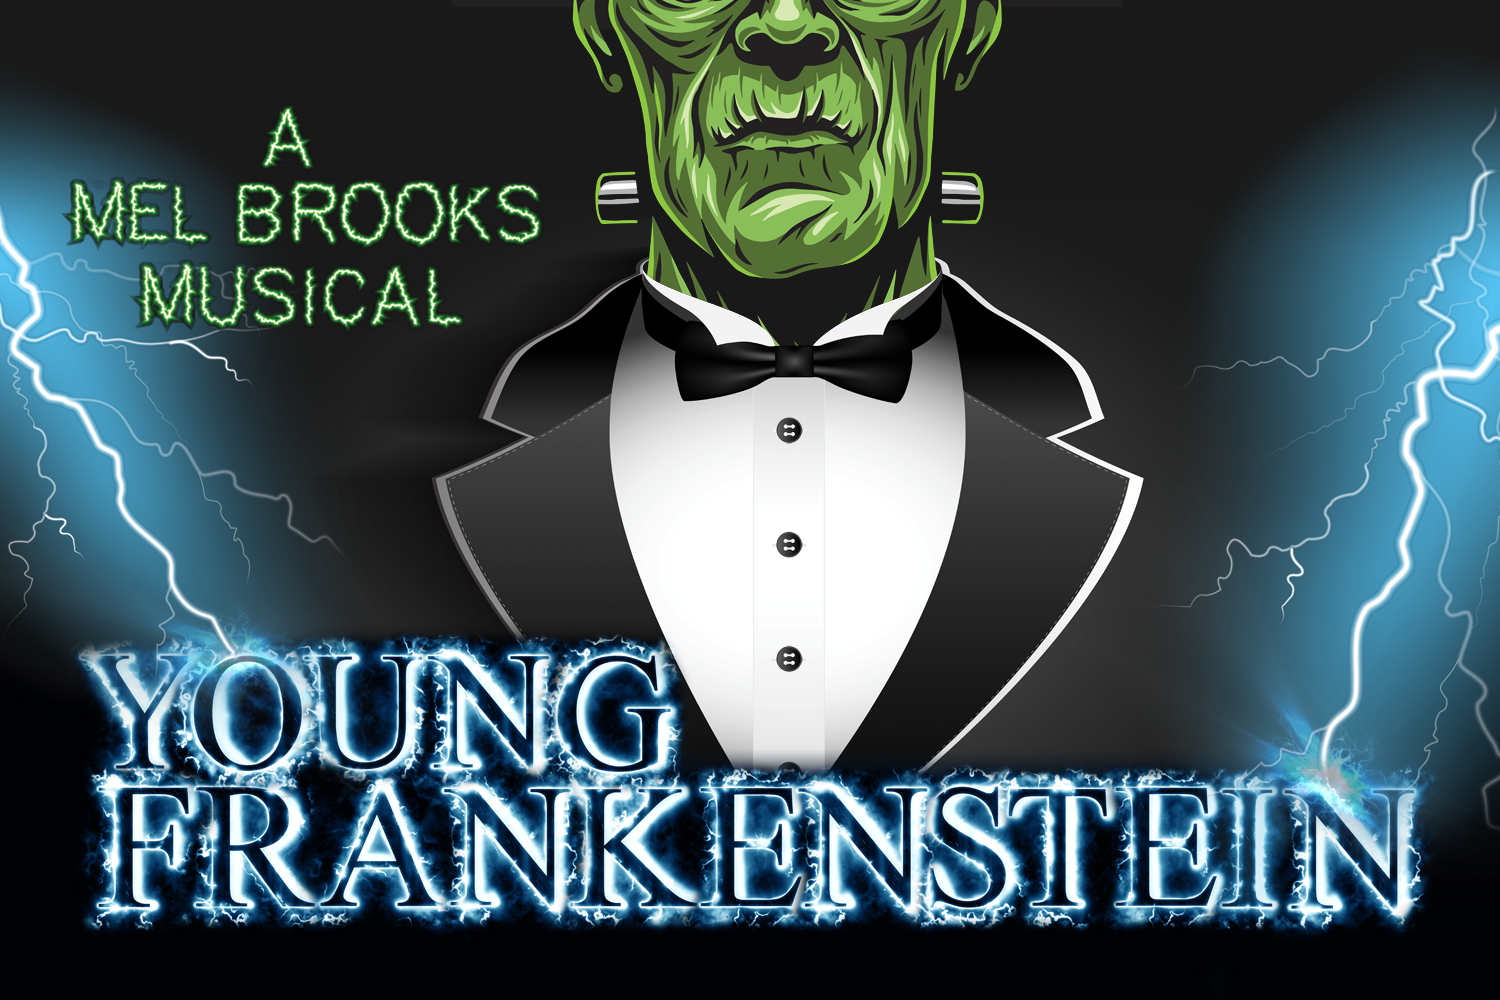 Young Frankenstein: A Mel Brooks Musical